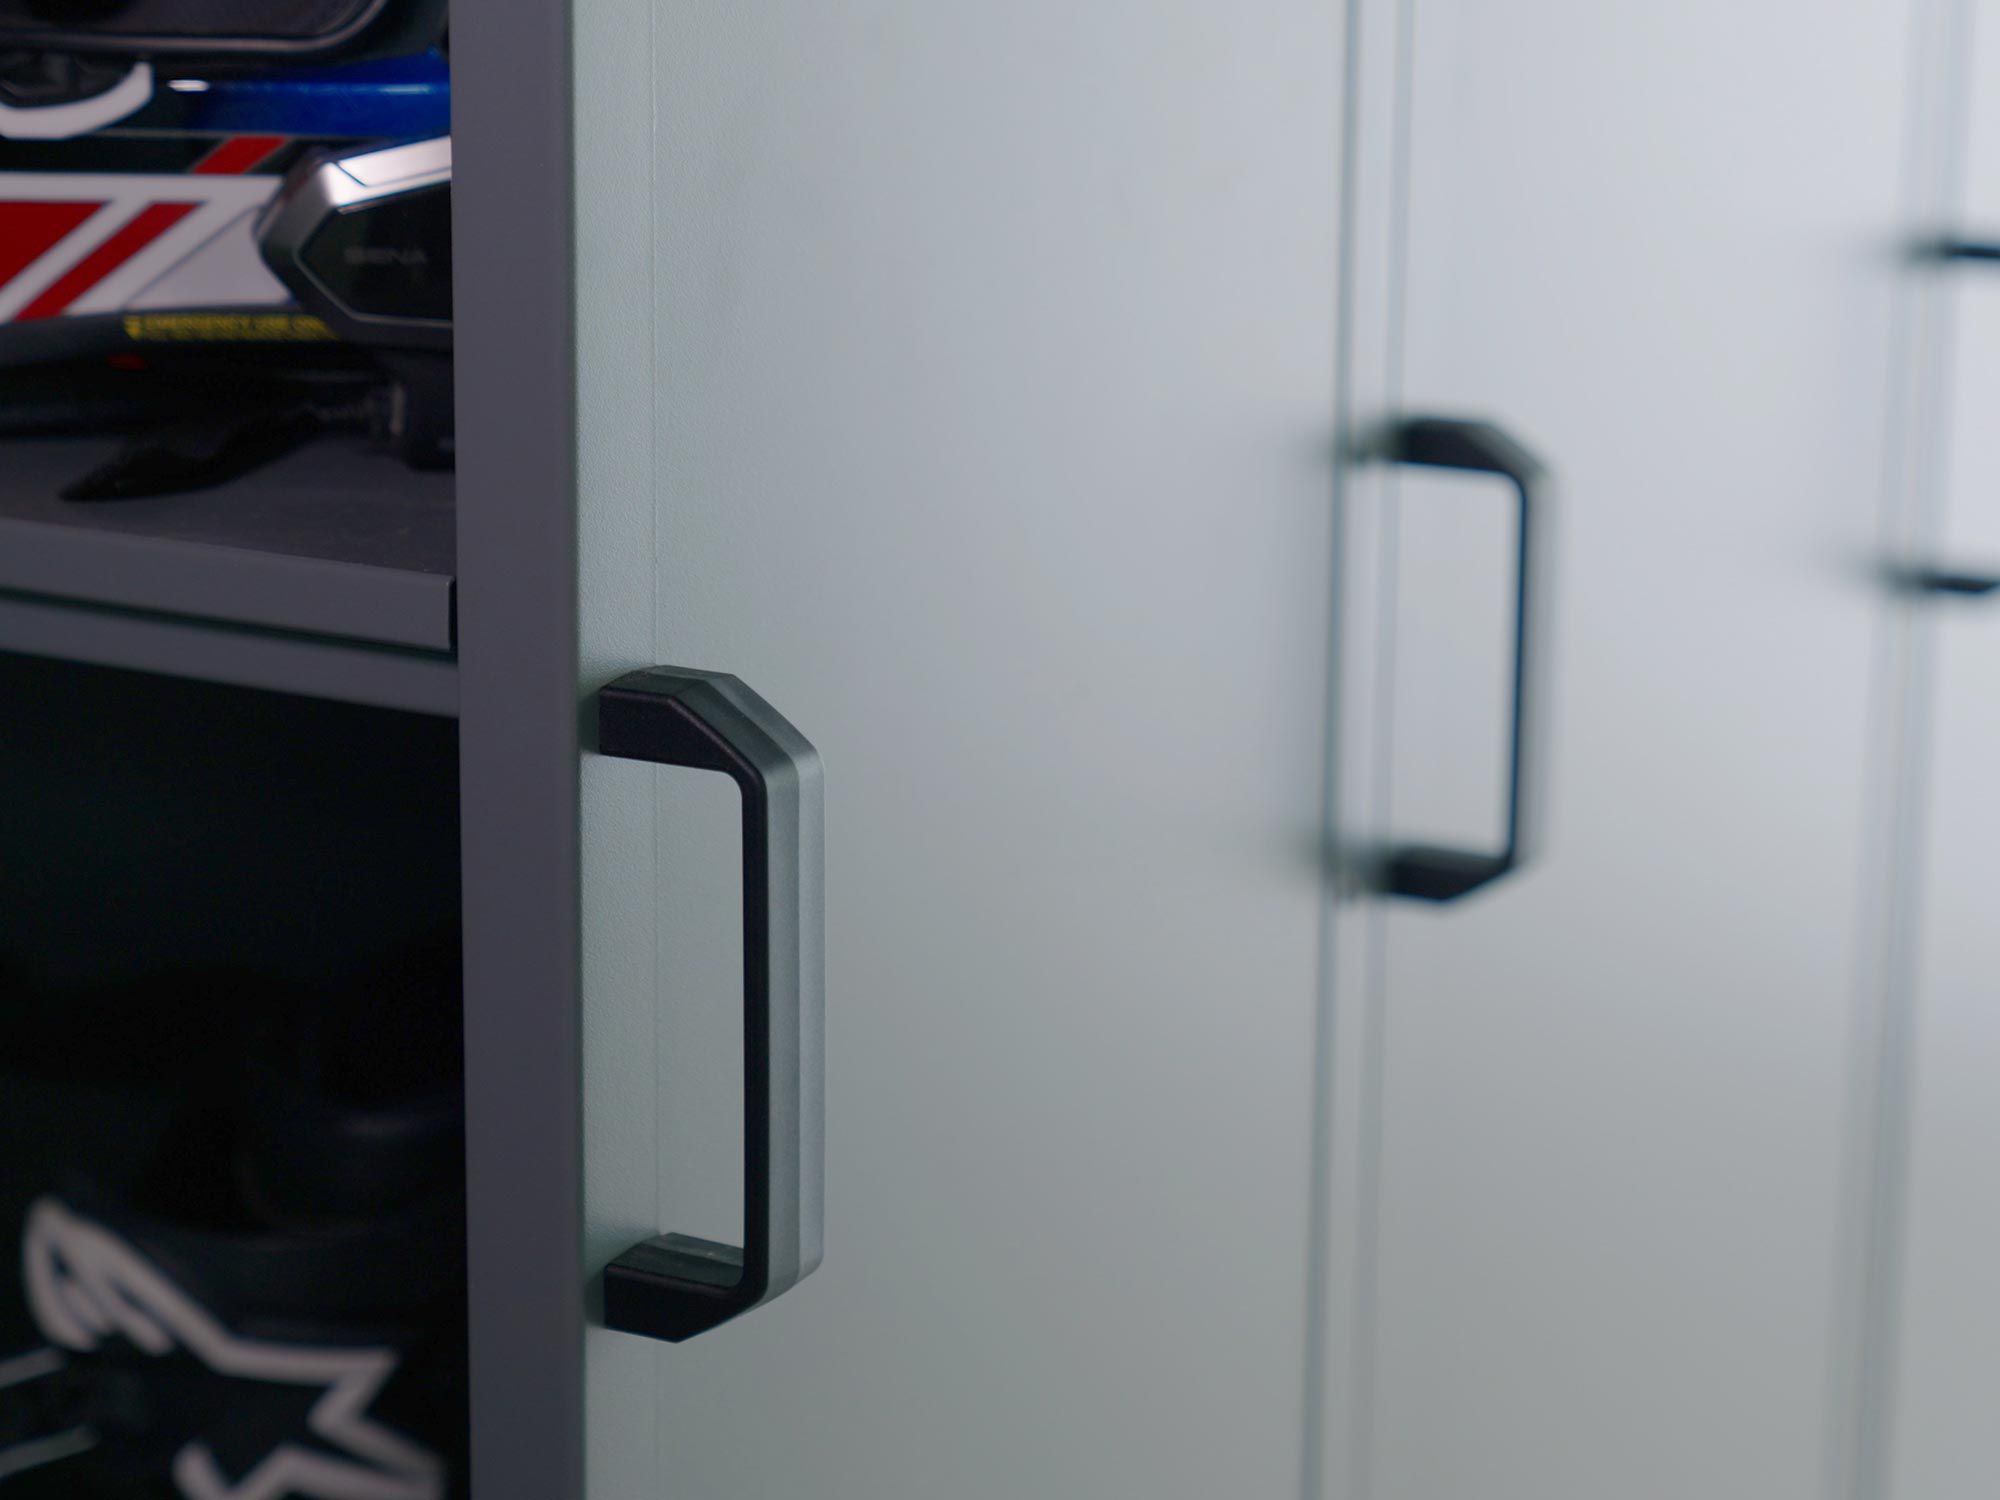 Levrack offers a locking mechanism which prevents unwanted access.